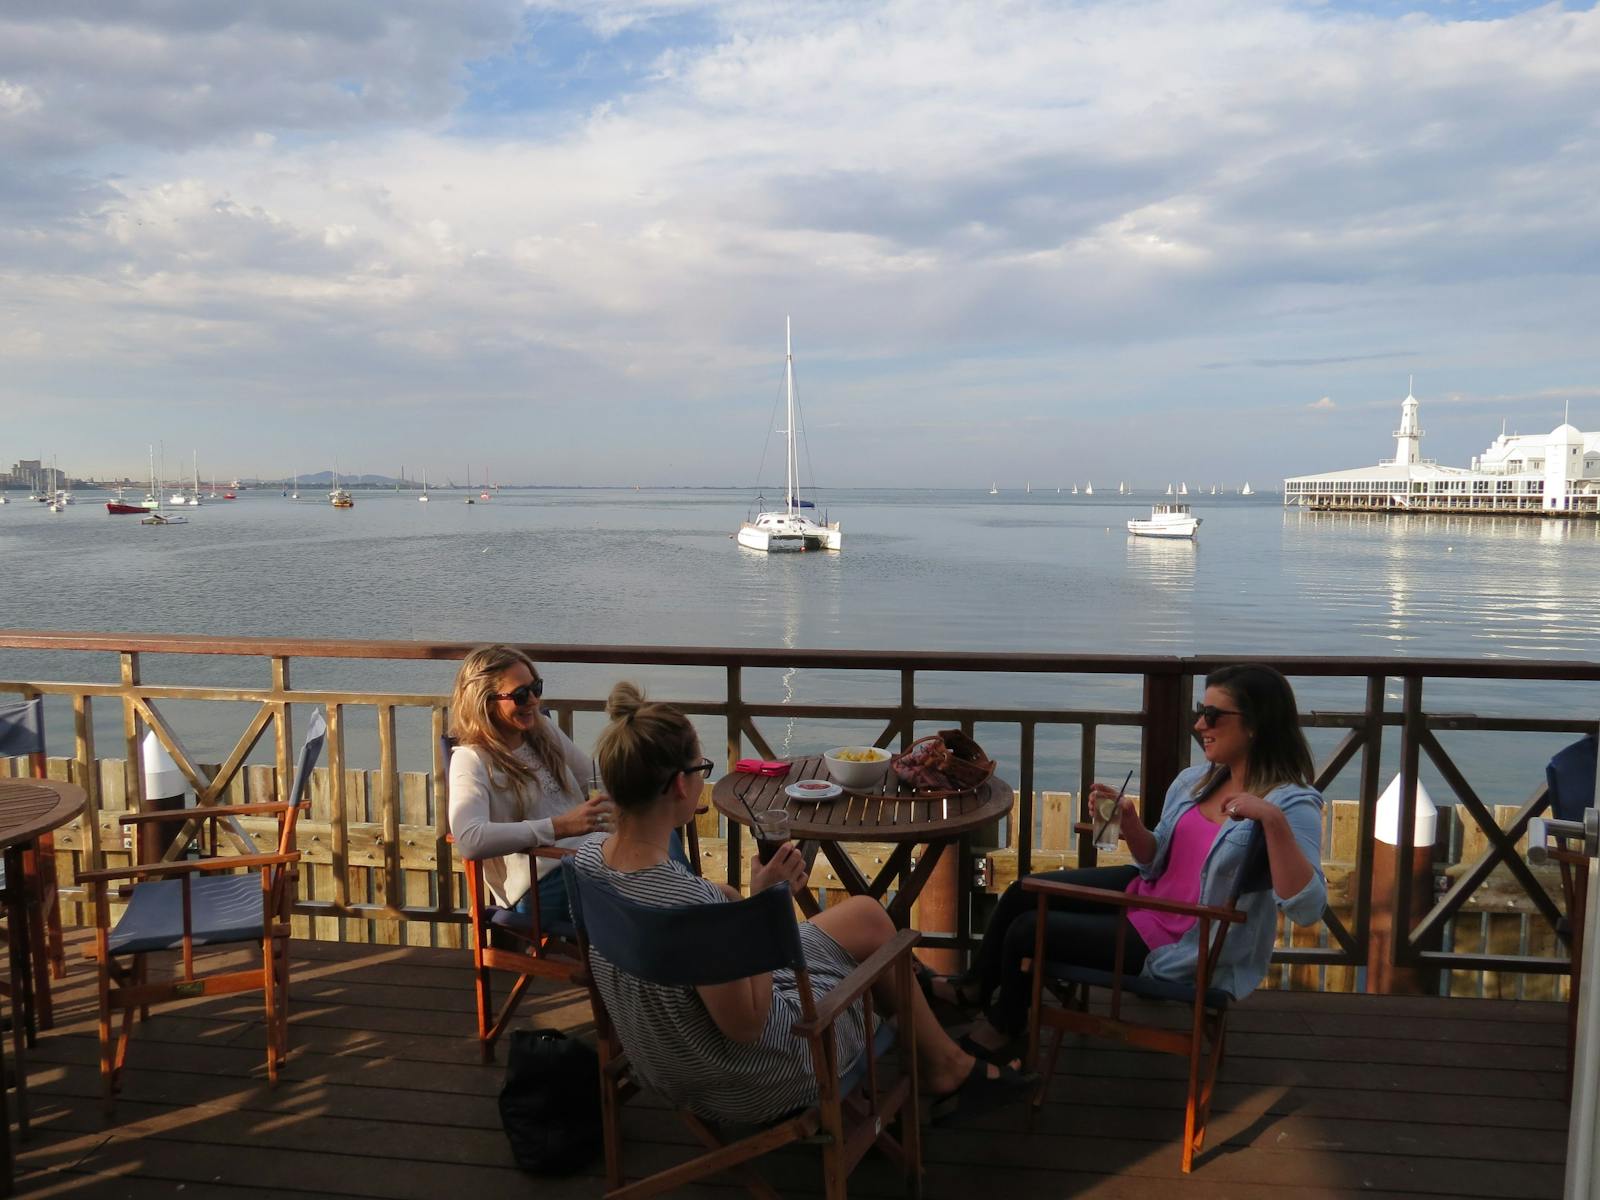 Al fresco dining above Geelong Boathouse, overlooking Corio Bay and Cunningham Pier.